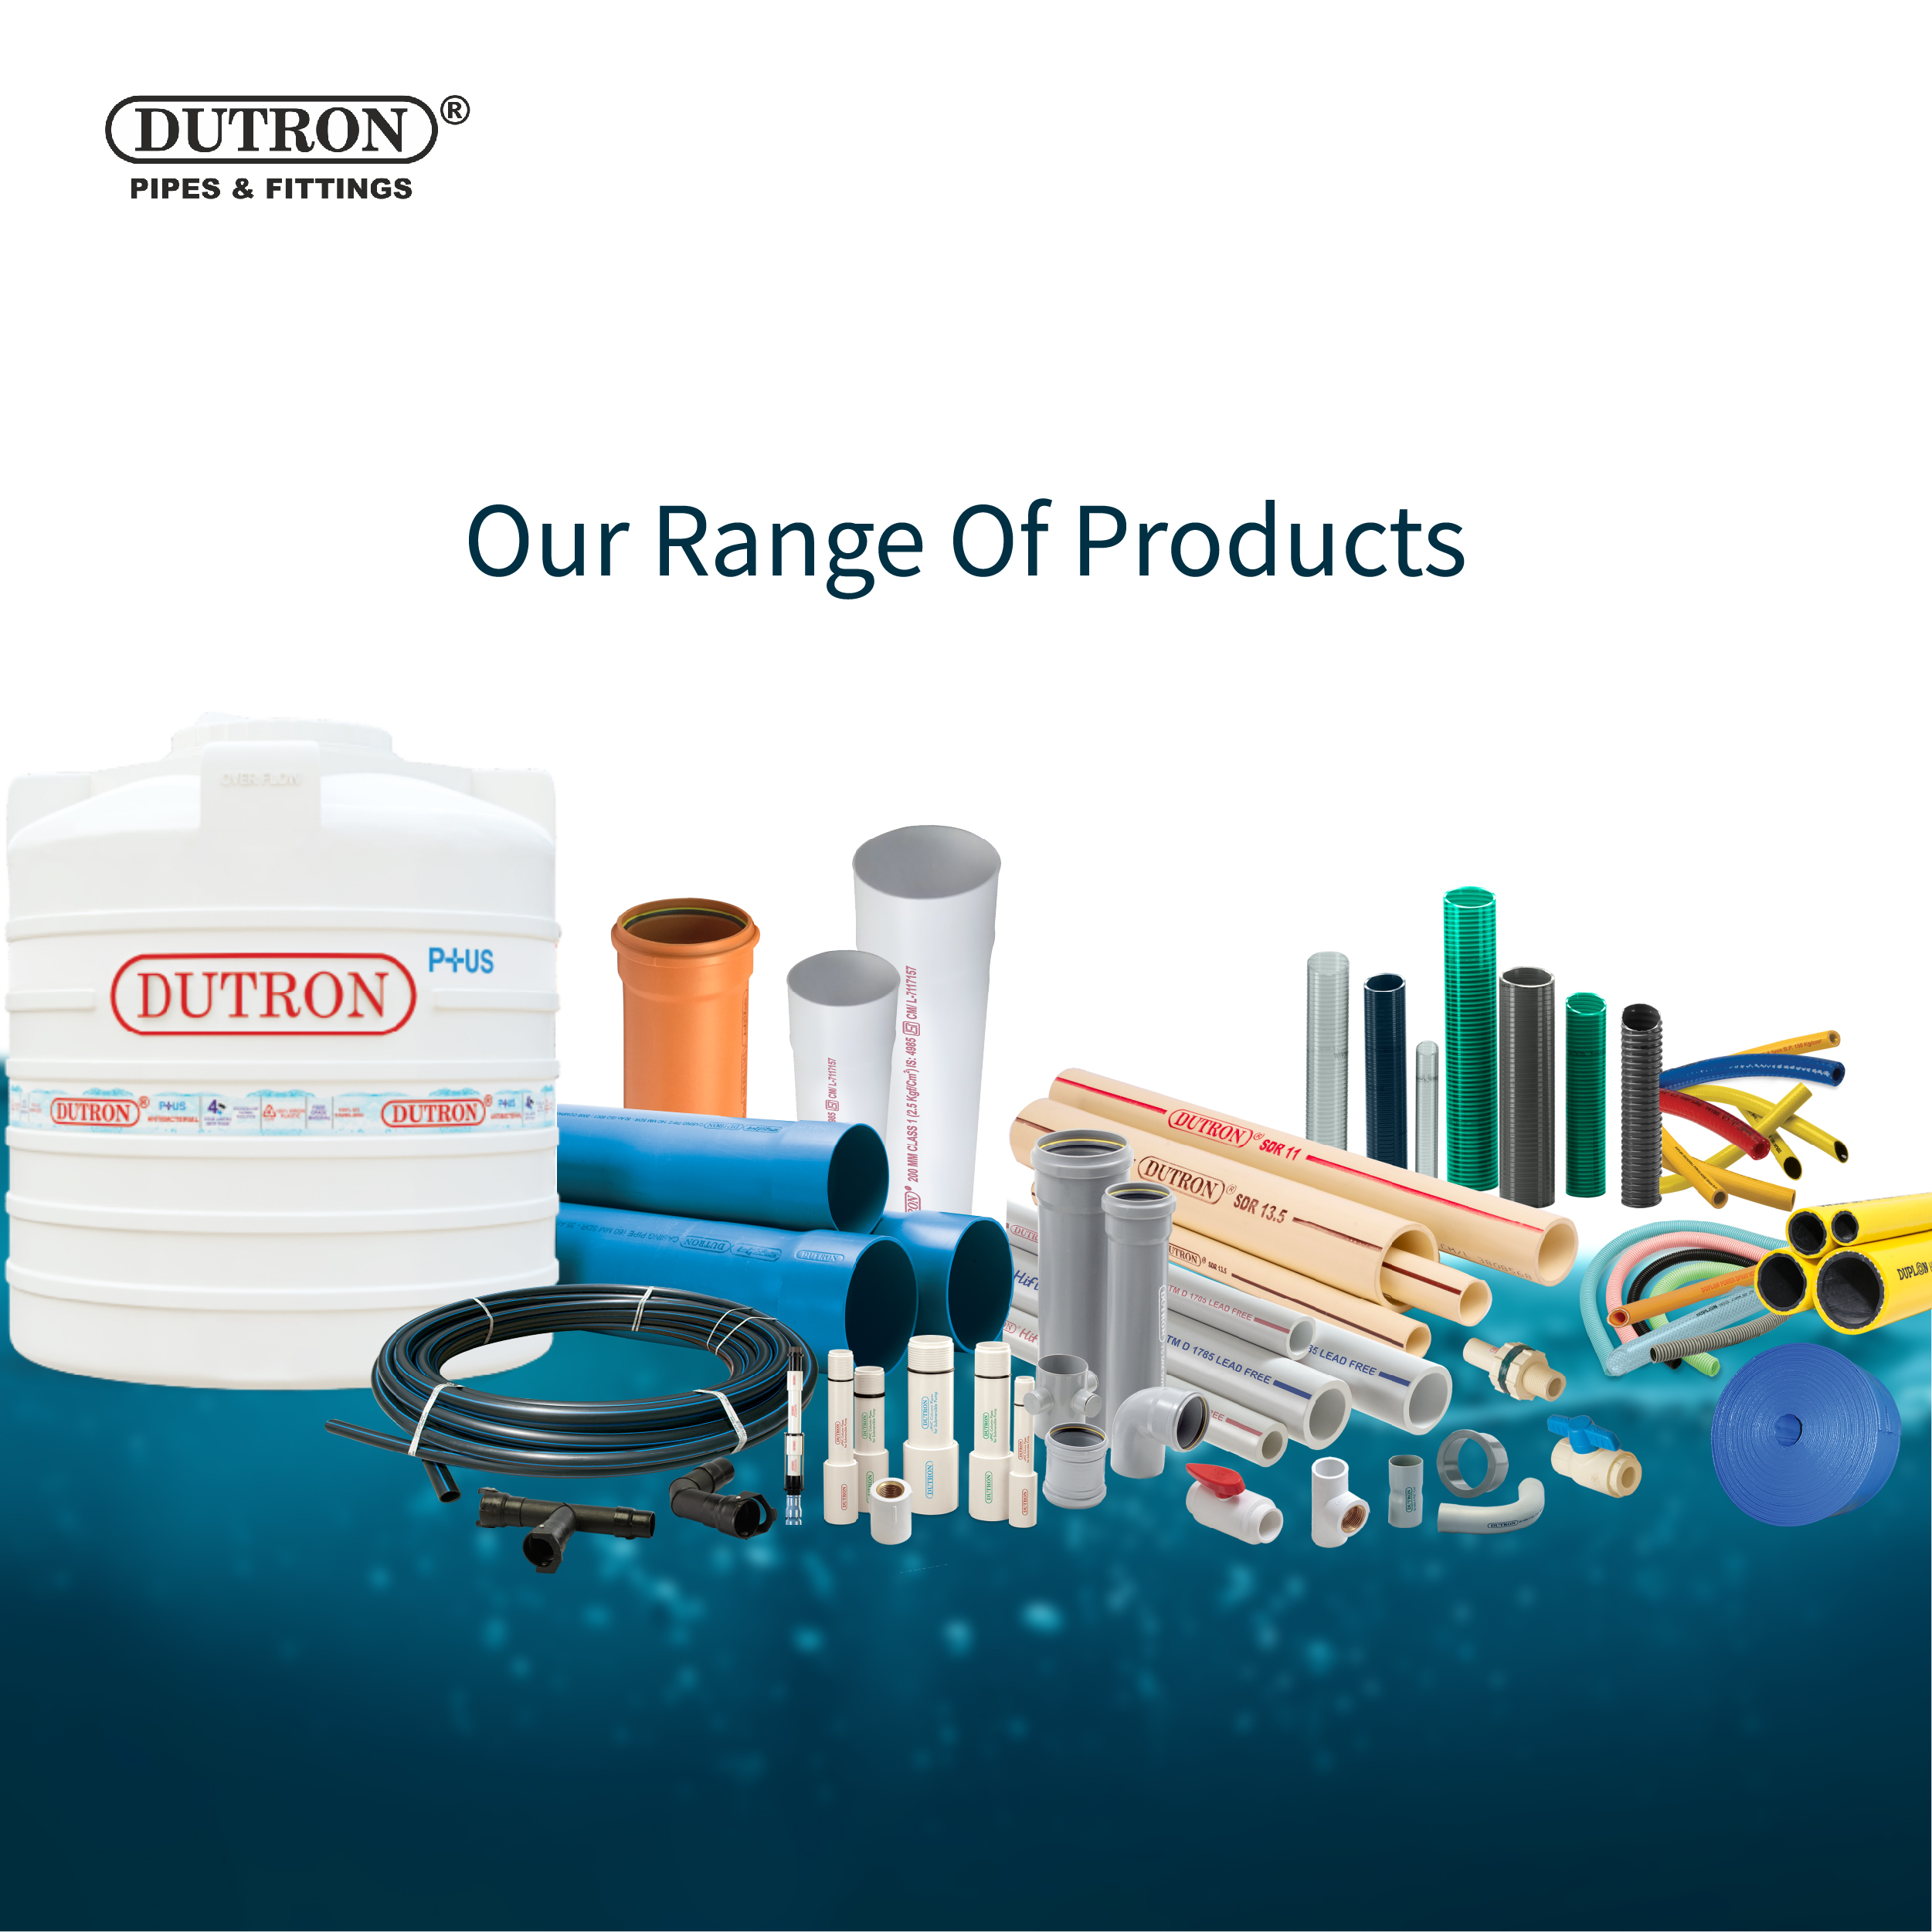 Dutron Products